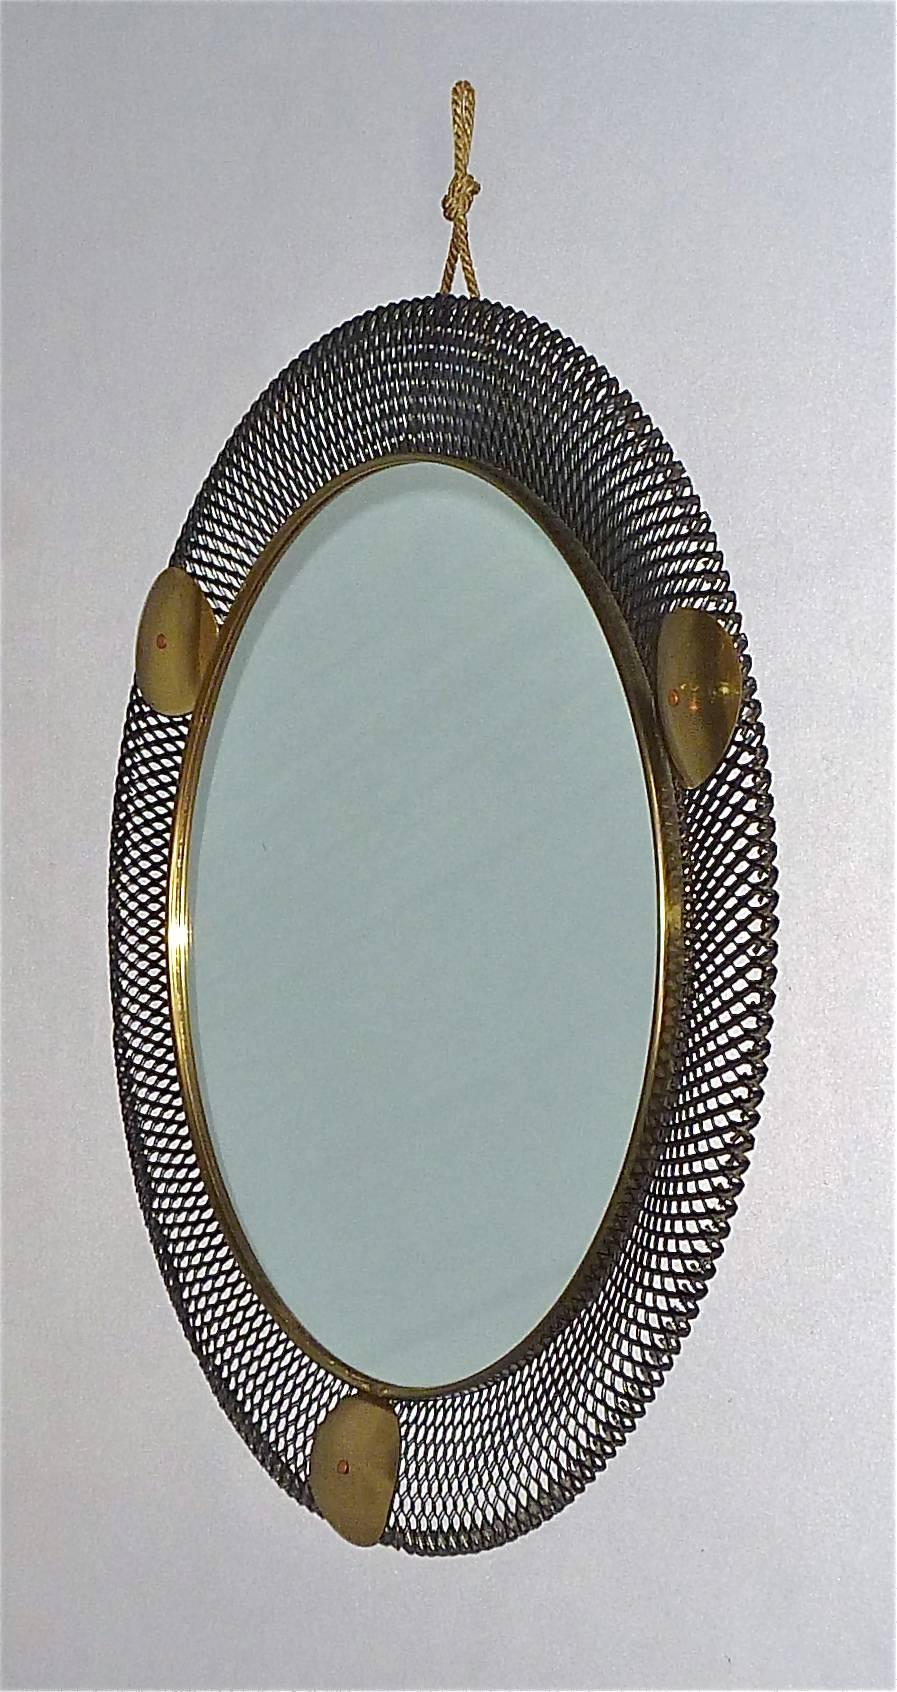 Round Black Midcentury Wall Mirror Brass Stretched Metal 1955 Mategot Biny Style 1